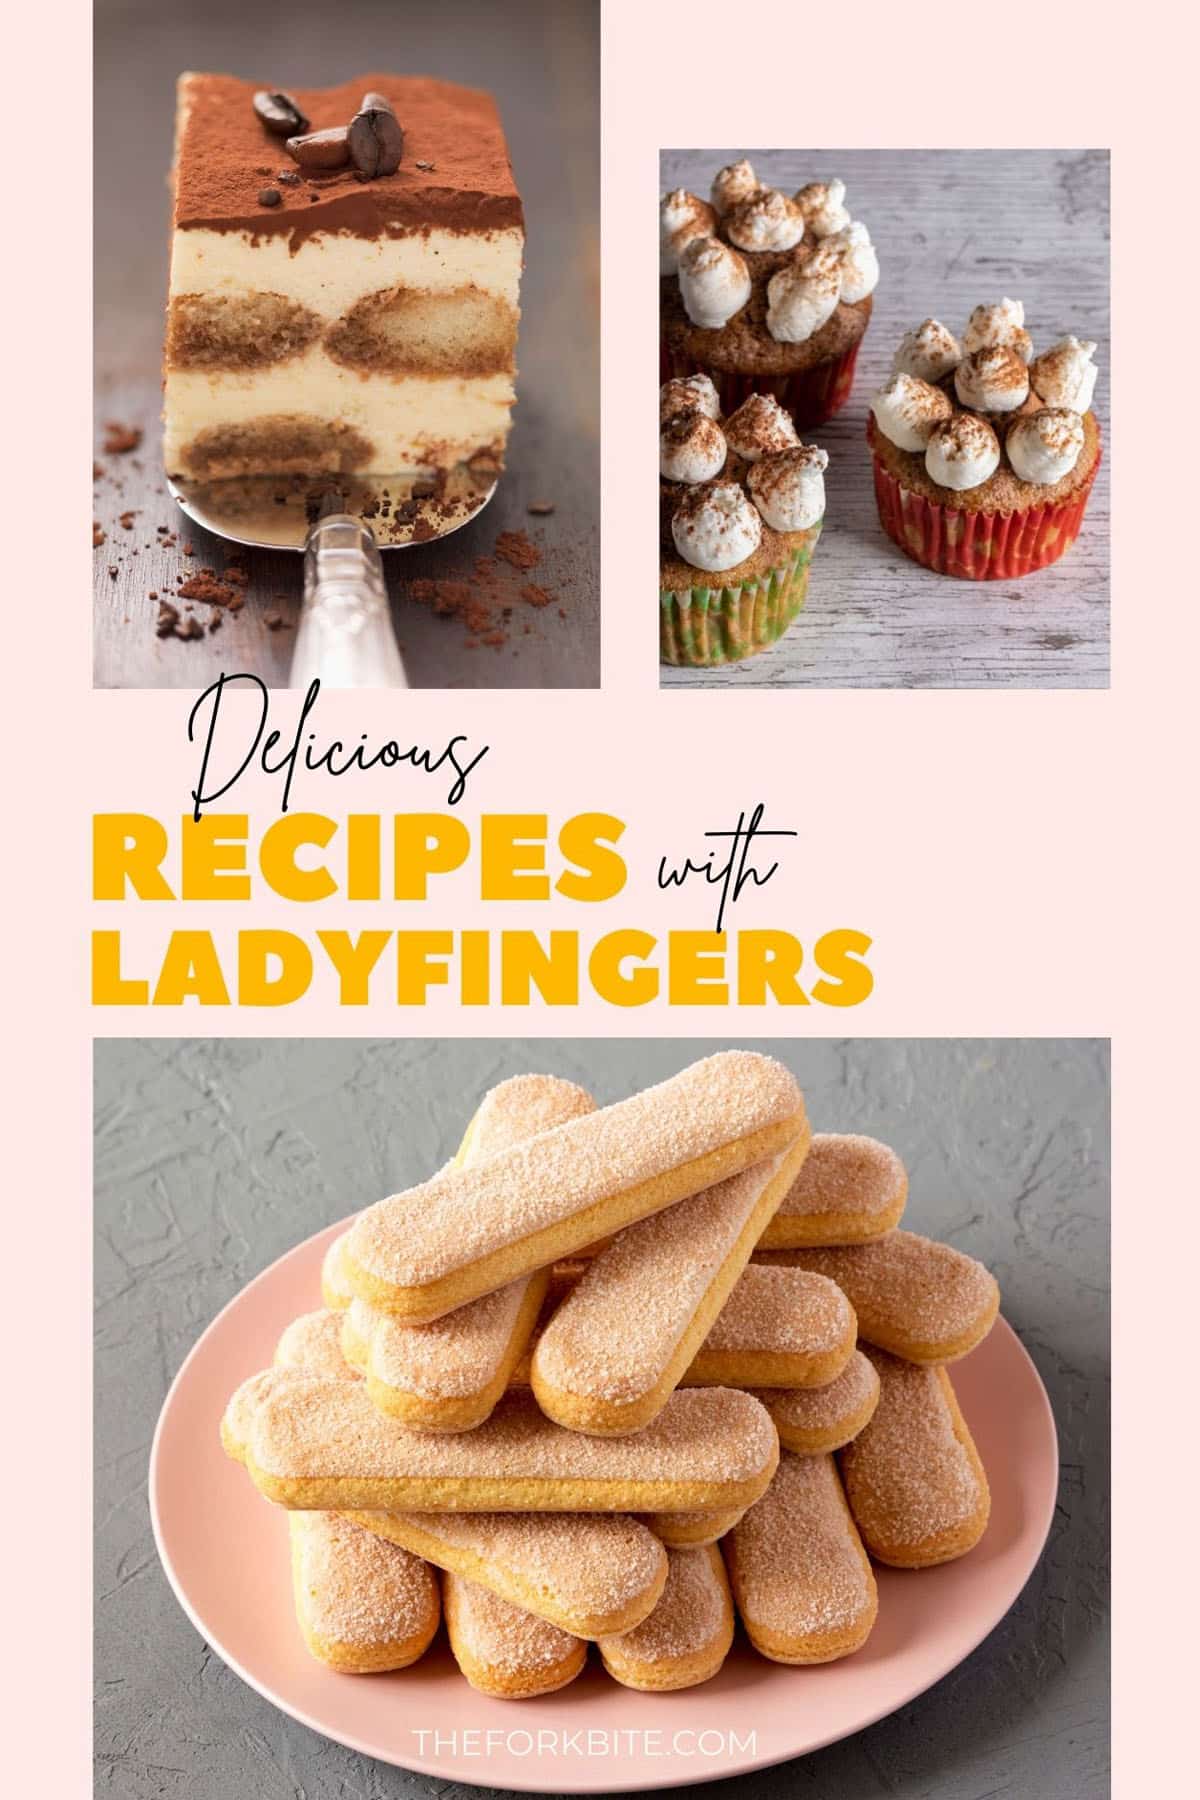 Assortment of desserts made with ladyfingers